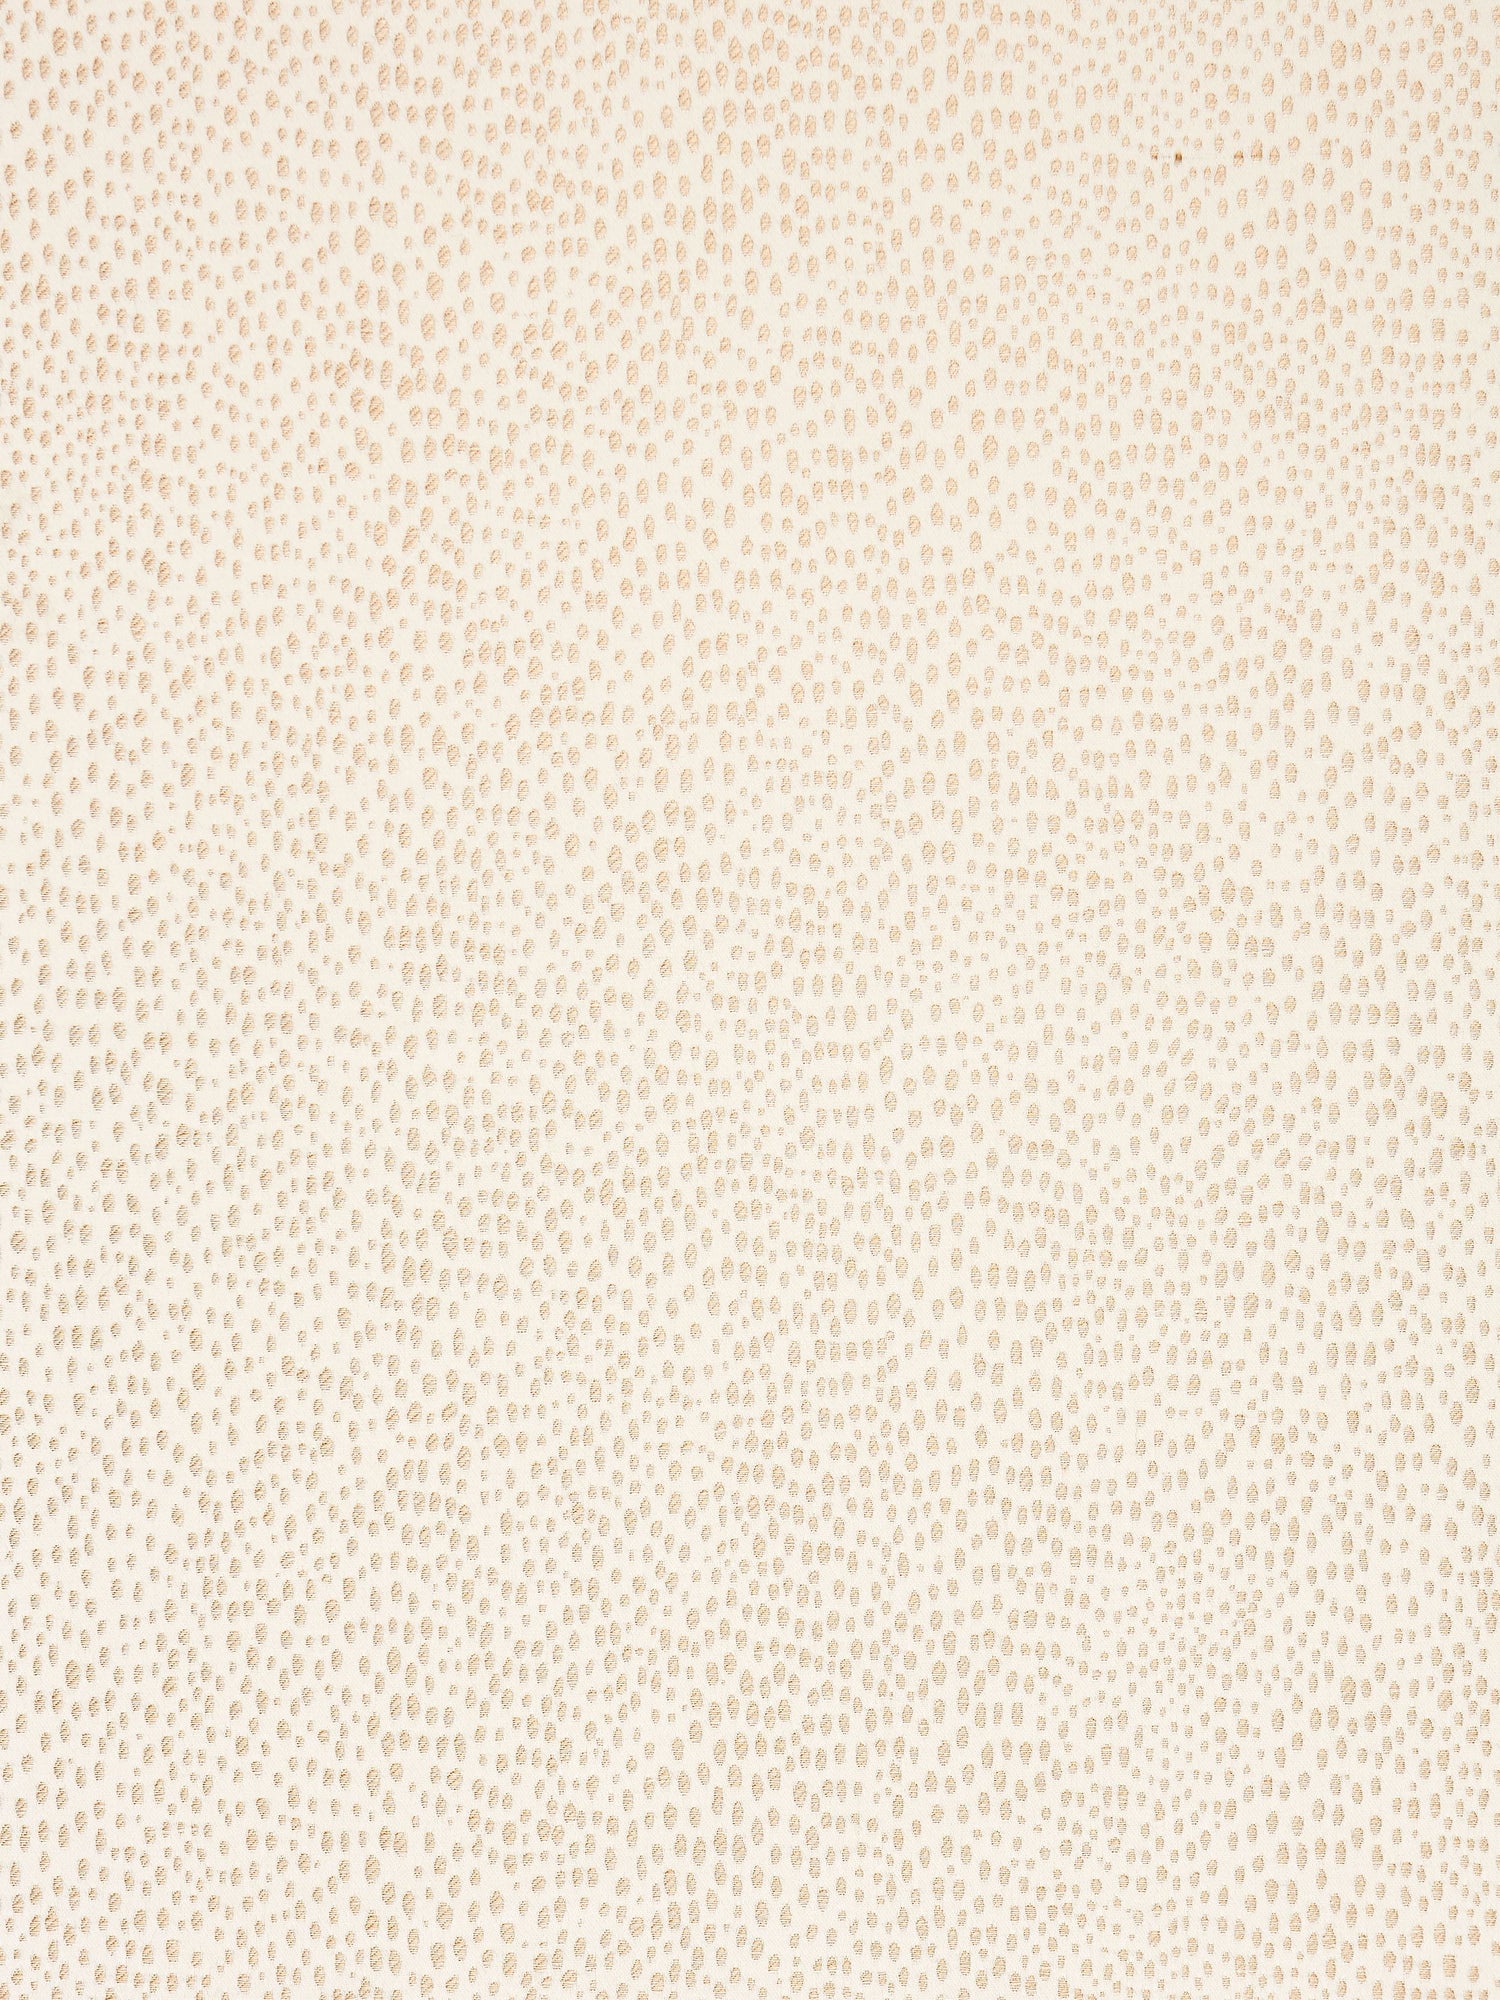 Raindrop fabric in sand color - pattern number SC 000127019 - by Scalamandre in the Scalamandre Fabrics Book 1 collection